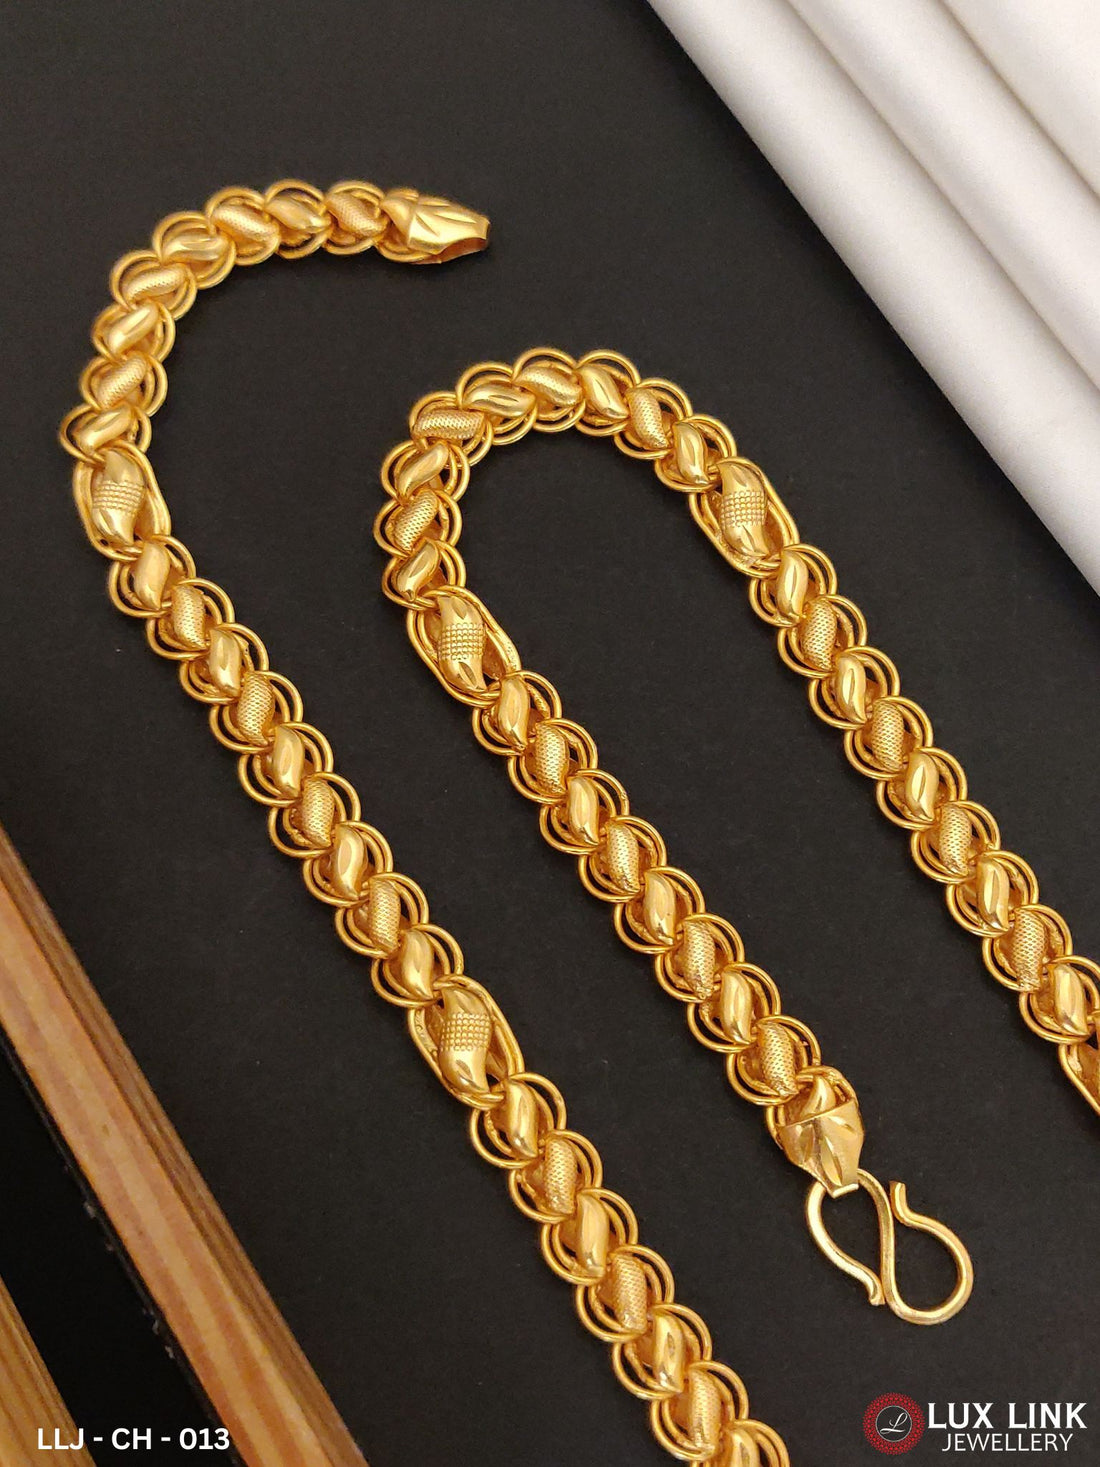 Classical luxury look with high-quality gold-plated Kohli Chain for Men - CH - 013